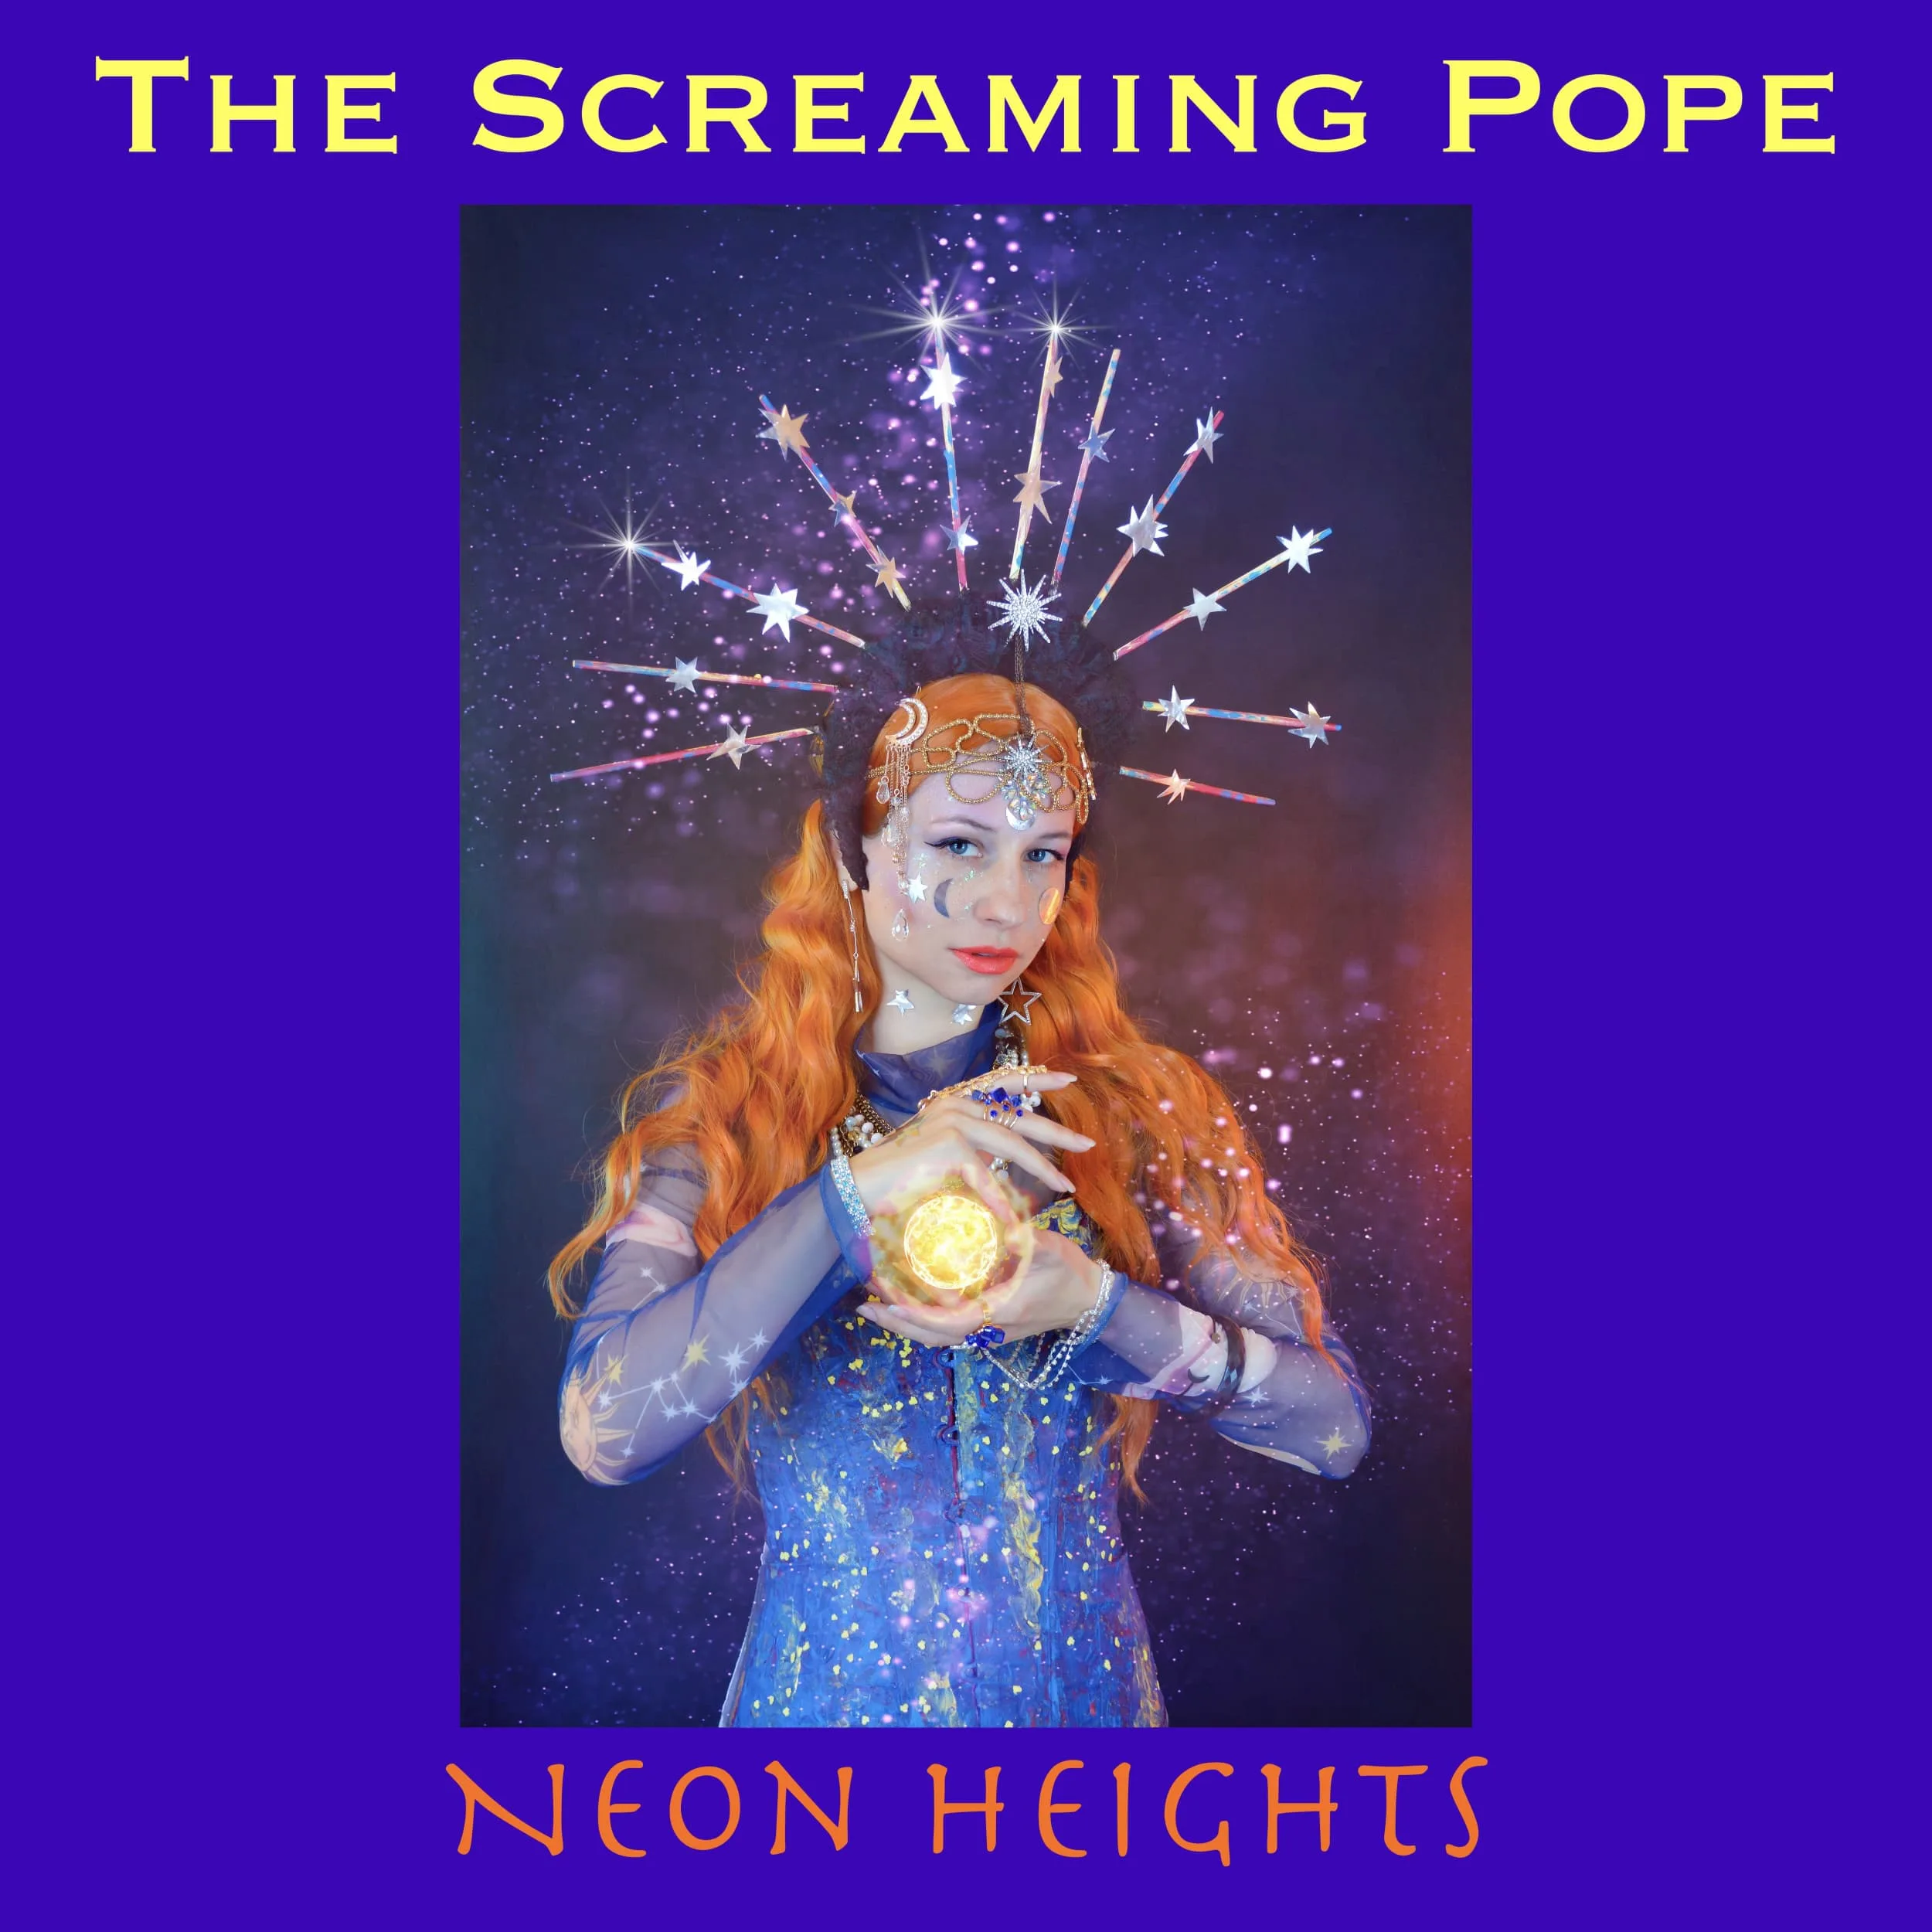 The Screaming Pope